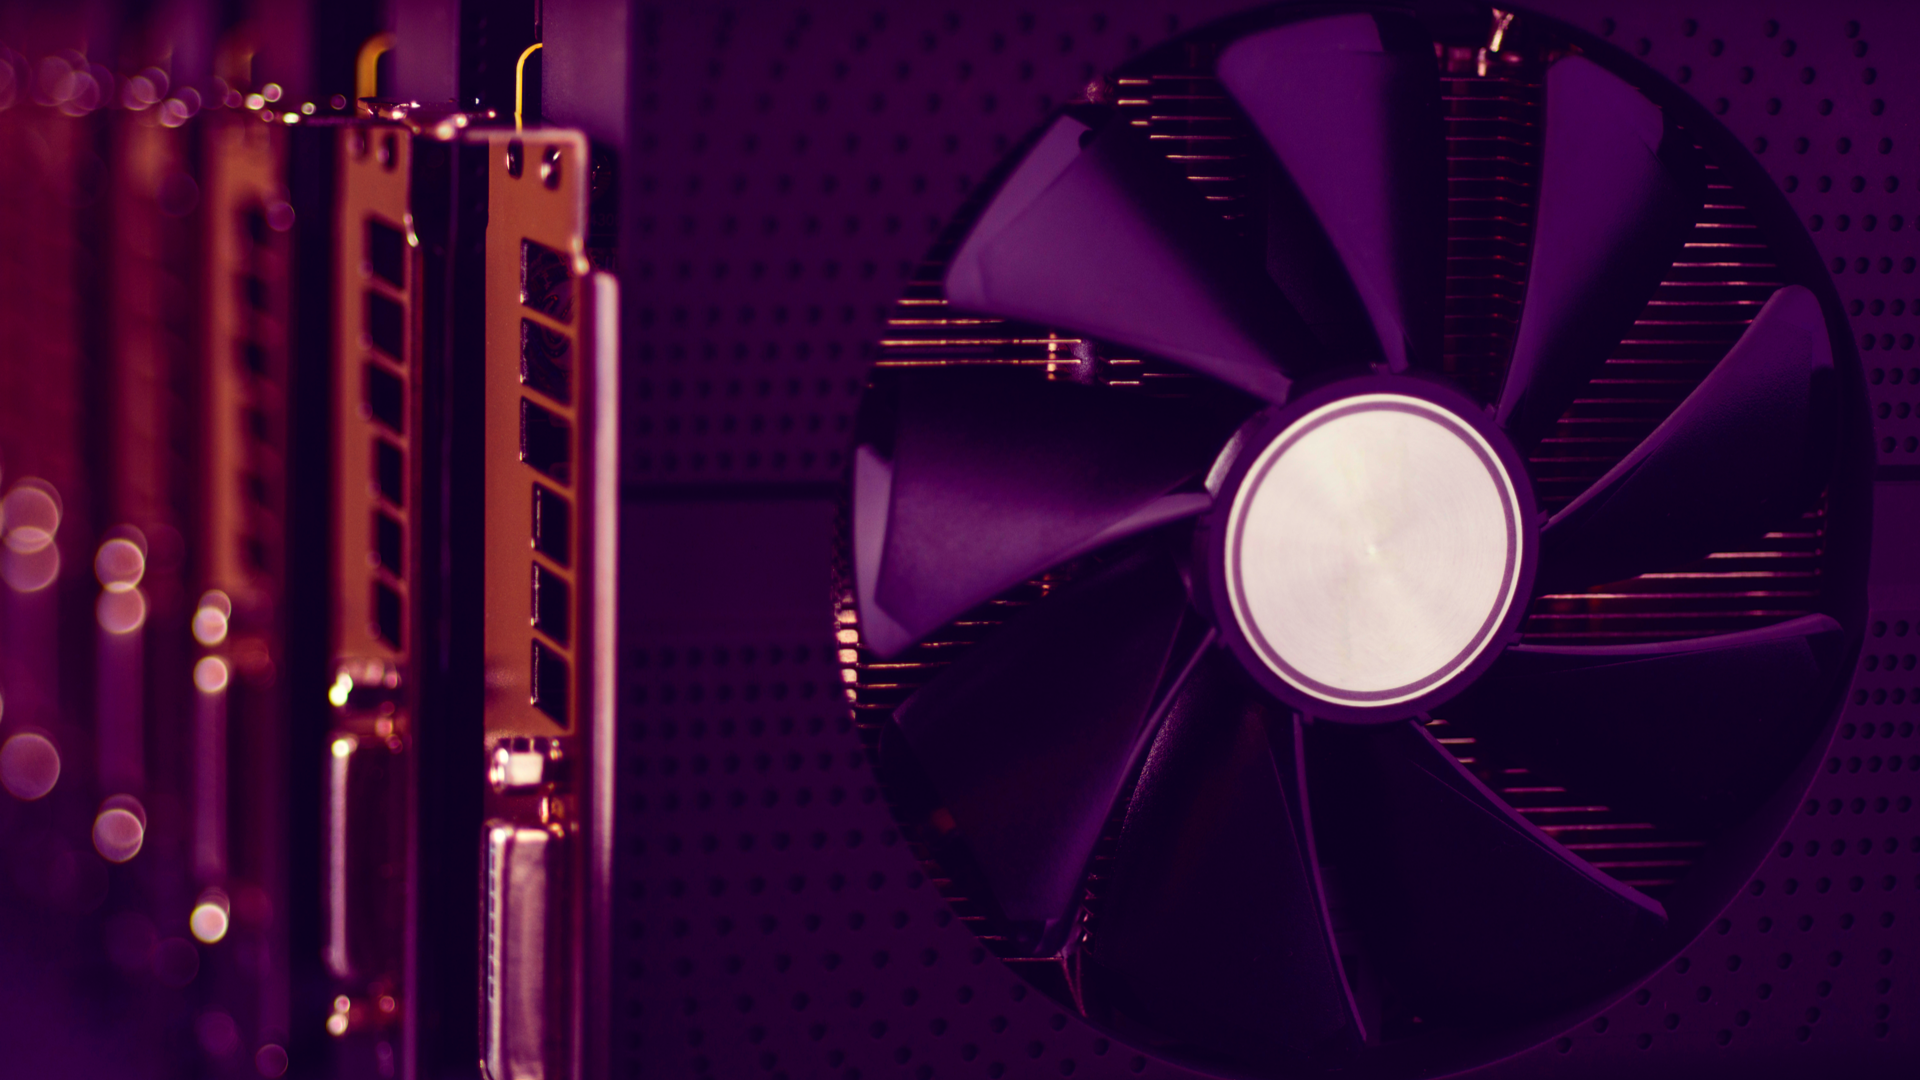 Nvidia RTX 3080 price gets slashed by 35% overnight – is the nightmare over?